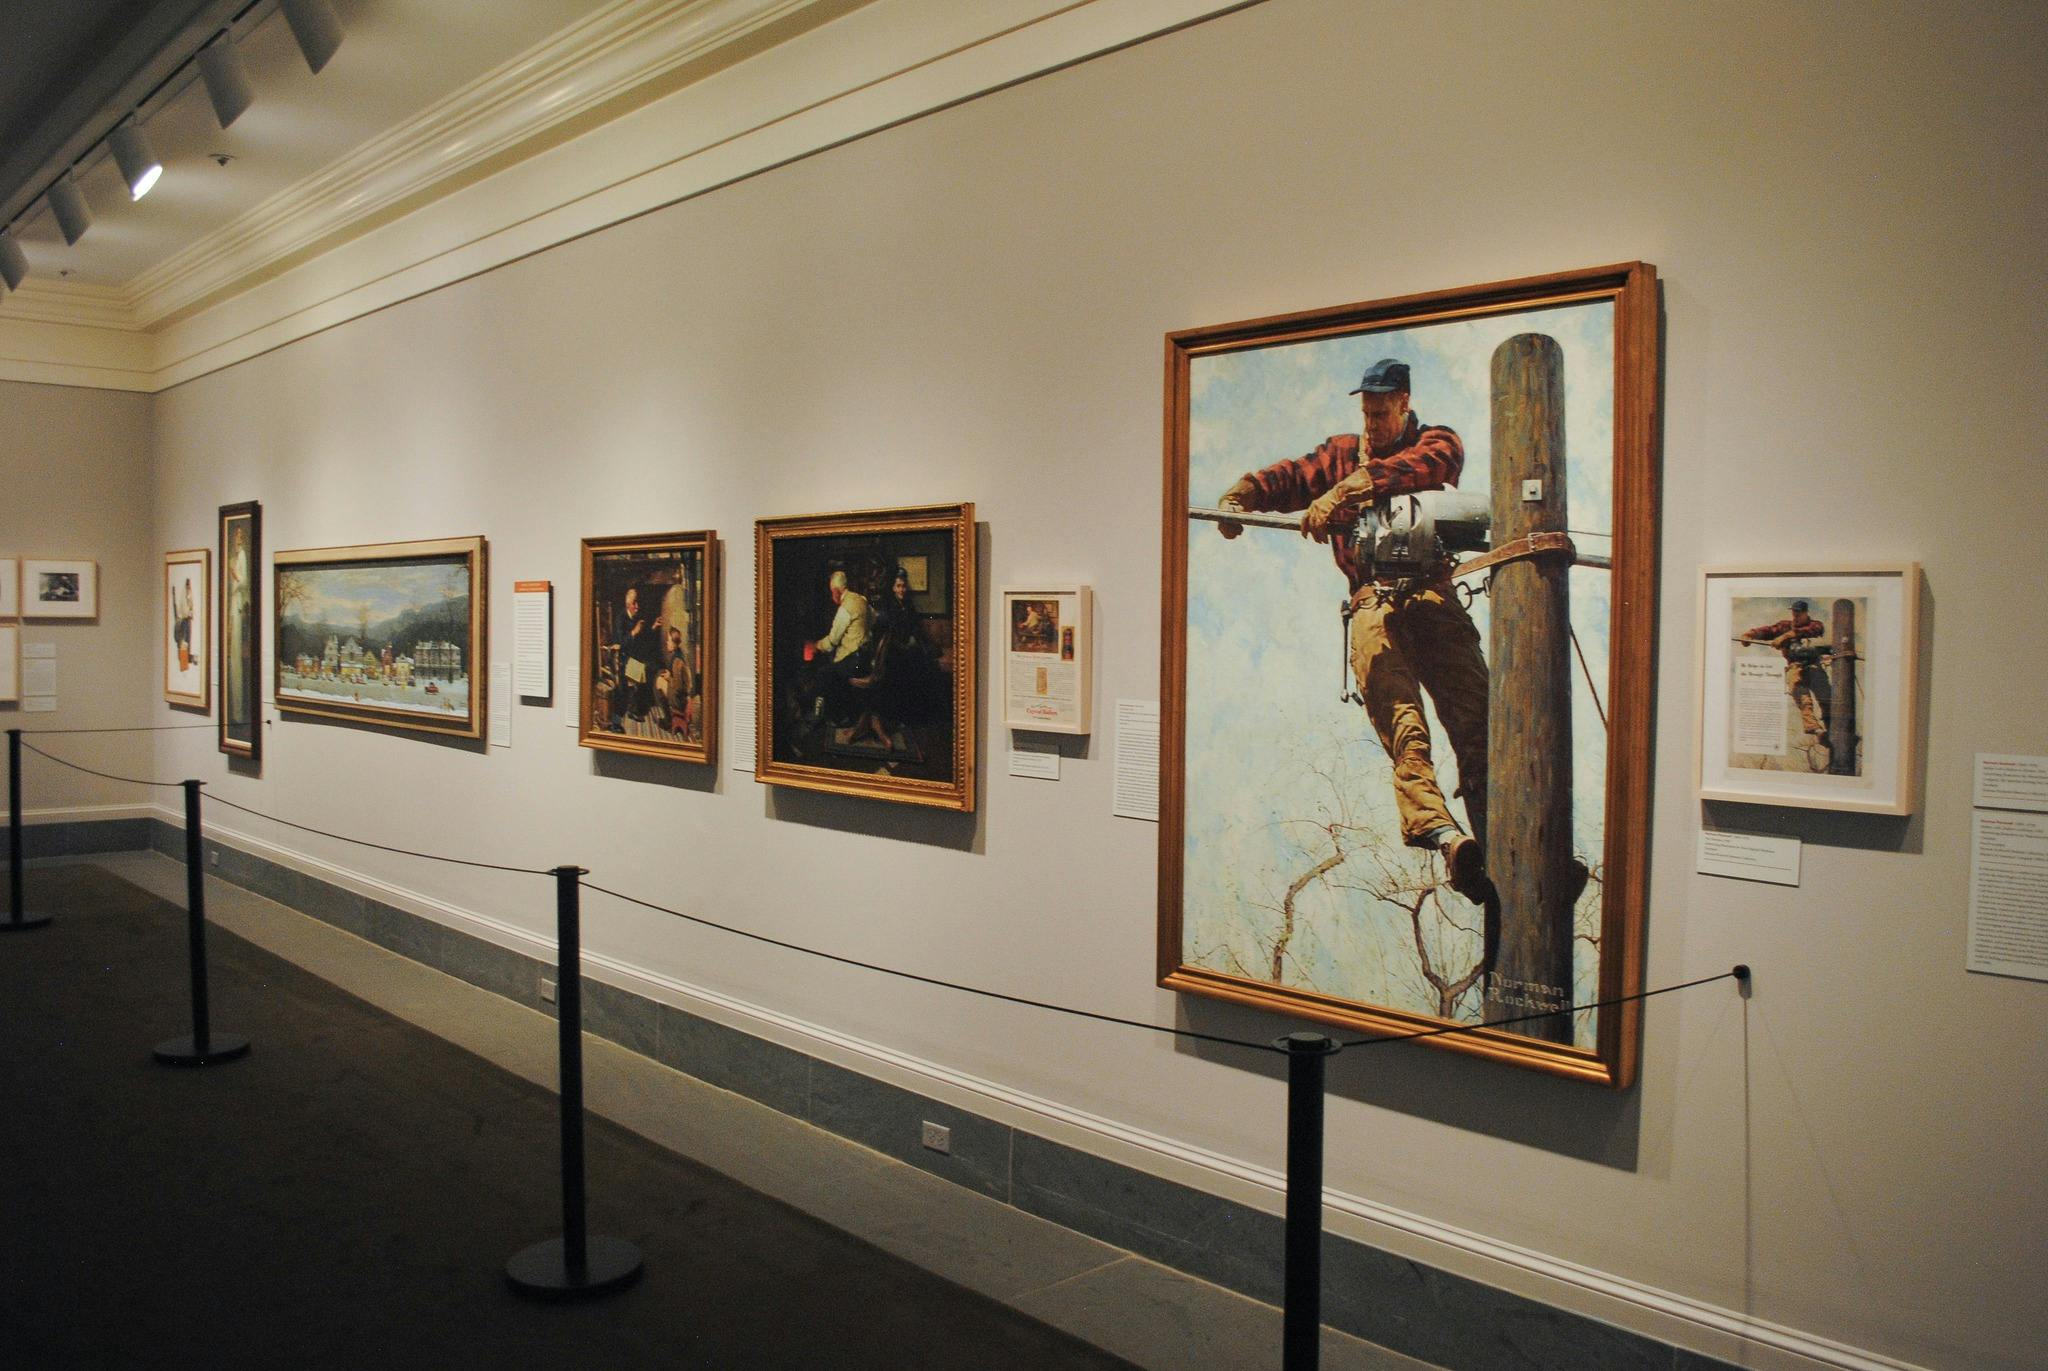 Photograph of the interior of the Norman Rockwell museum courtesy of the Norman Rockwell Museum via their Facebook page.